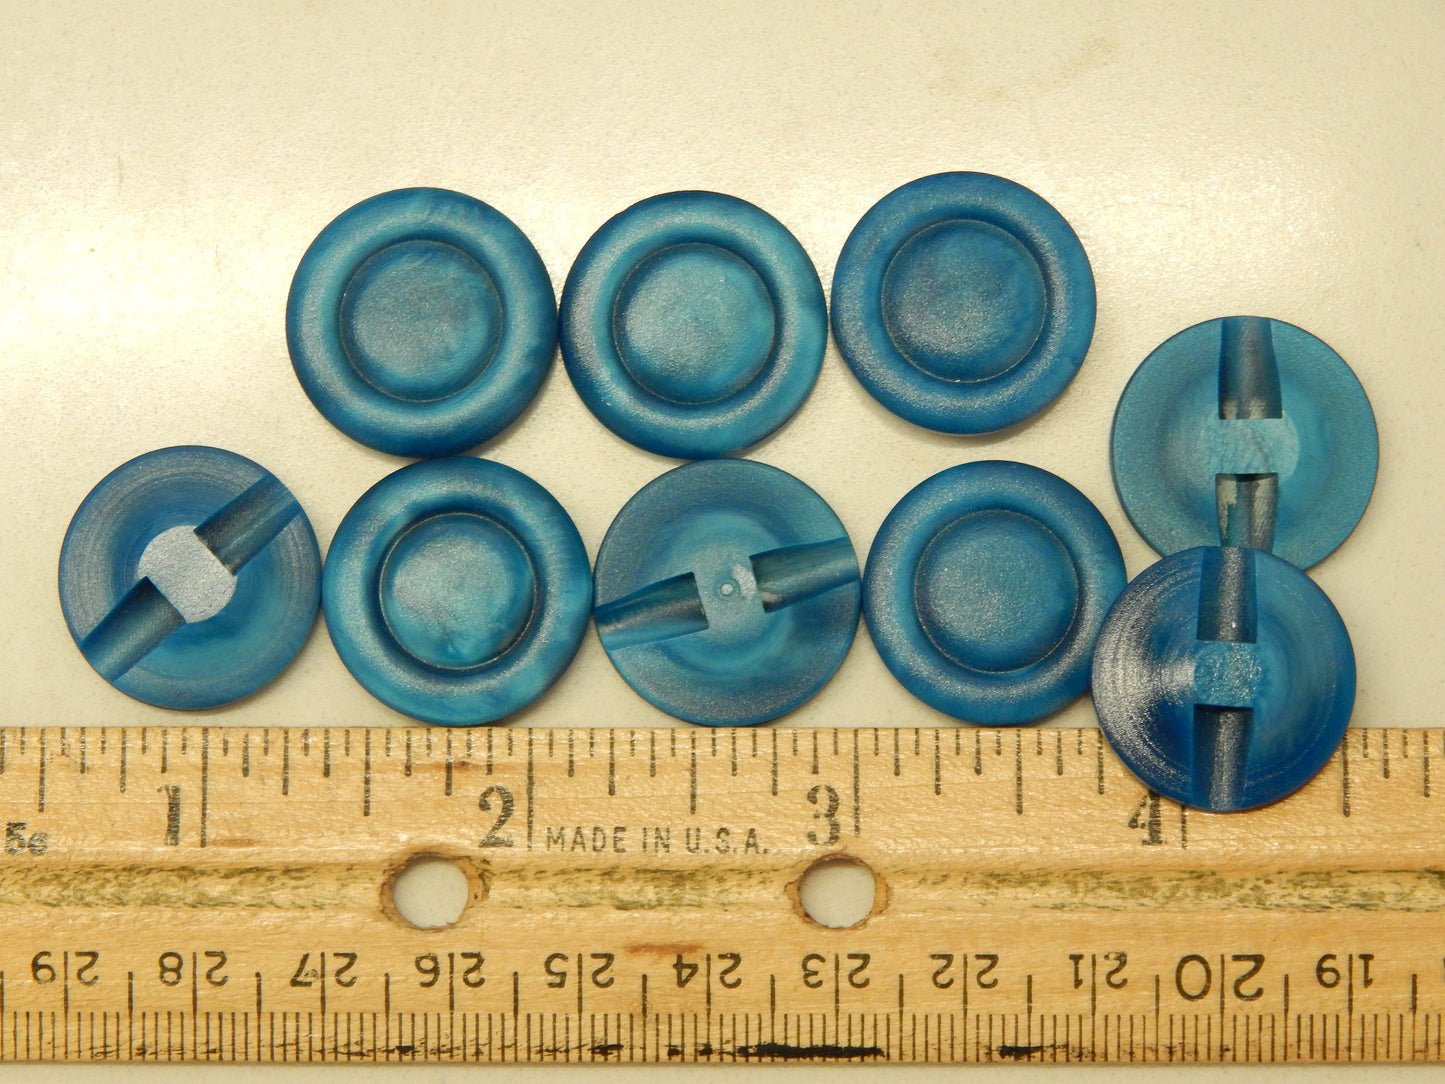 Shimmery Lapis Blue Buttons